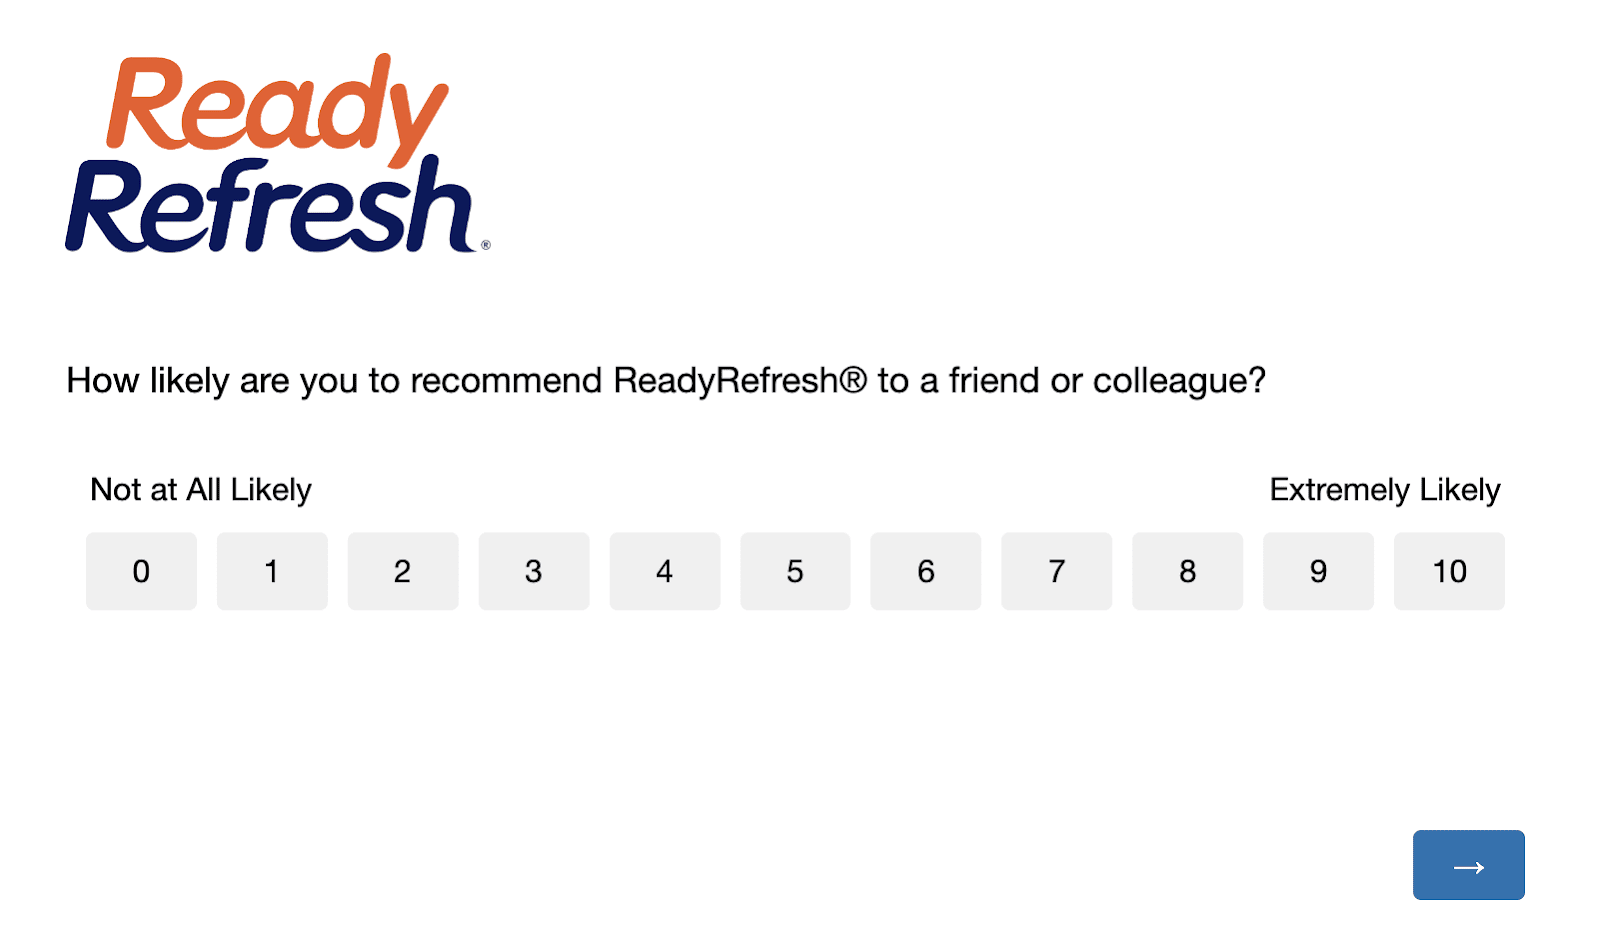 "How likely are you to recommend ReadyRefresh to a friend or colleague?" NPS